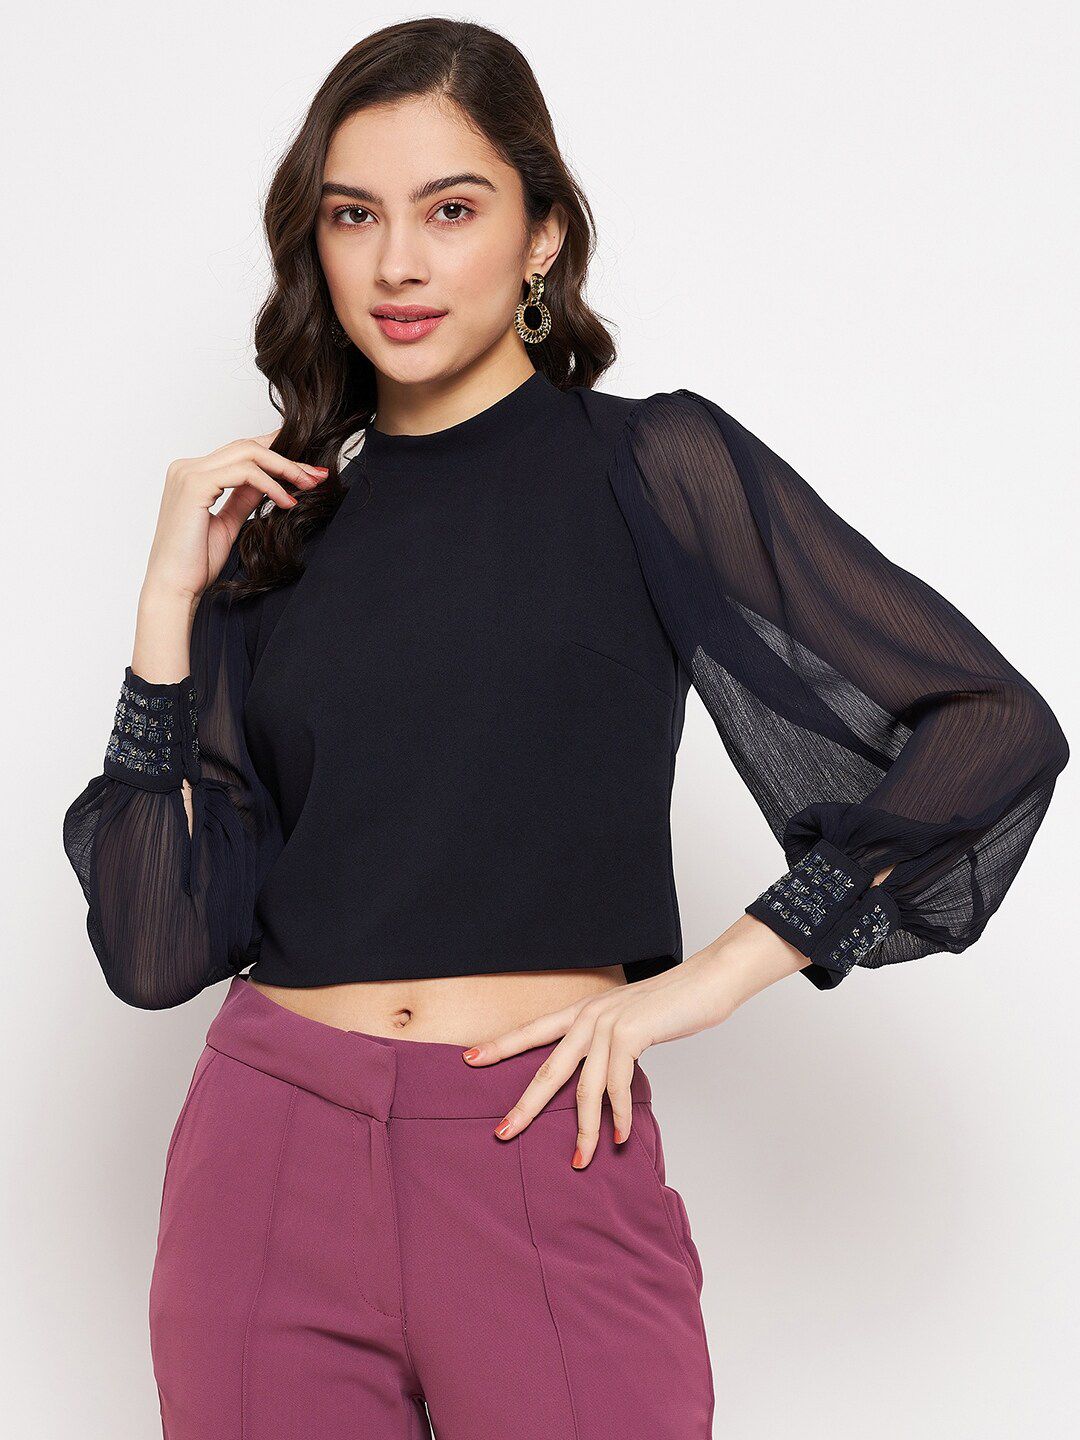 Madame Woman Crop Top Price in India